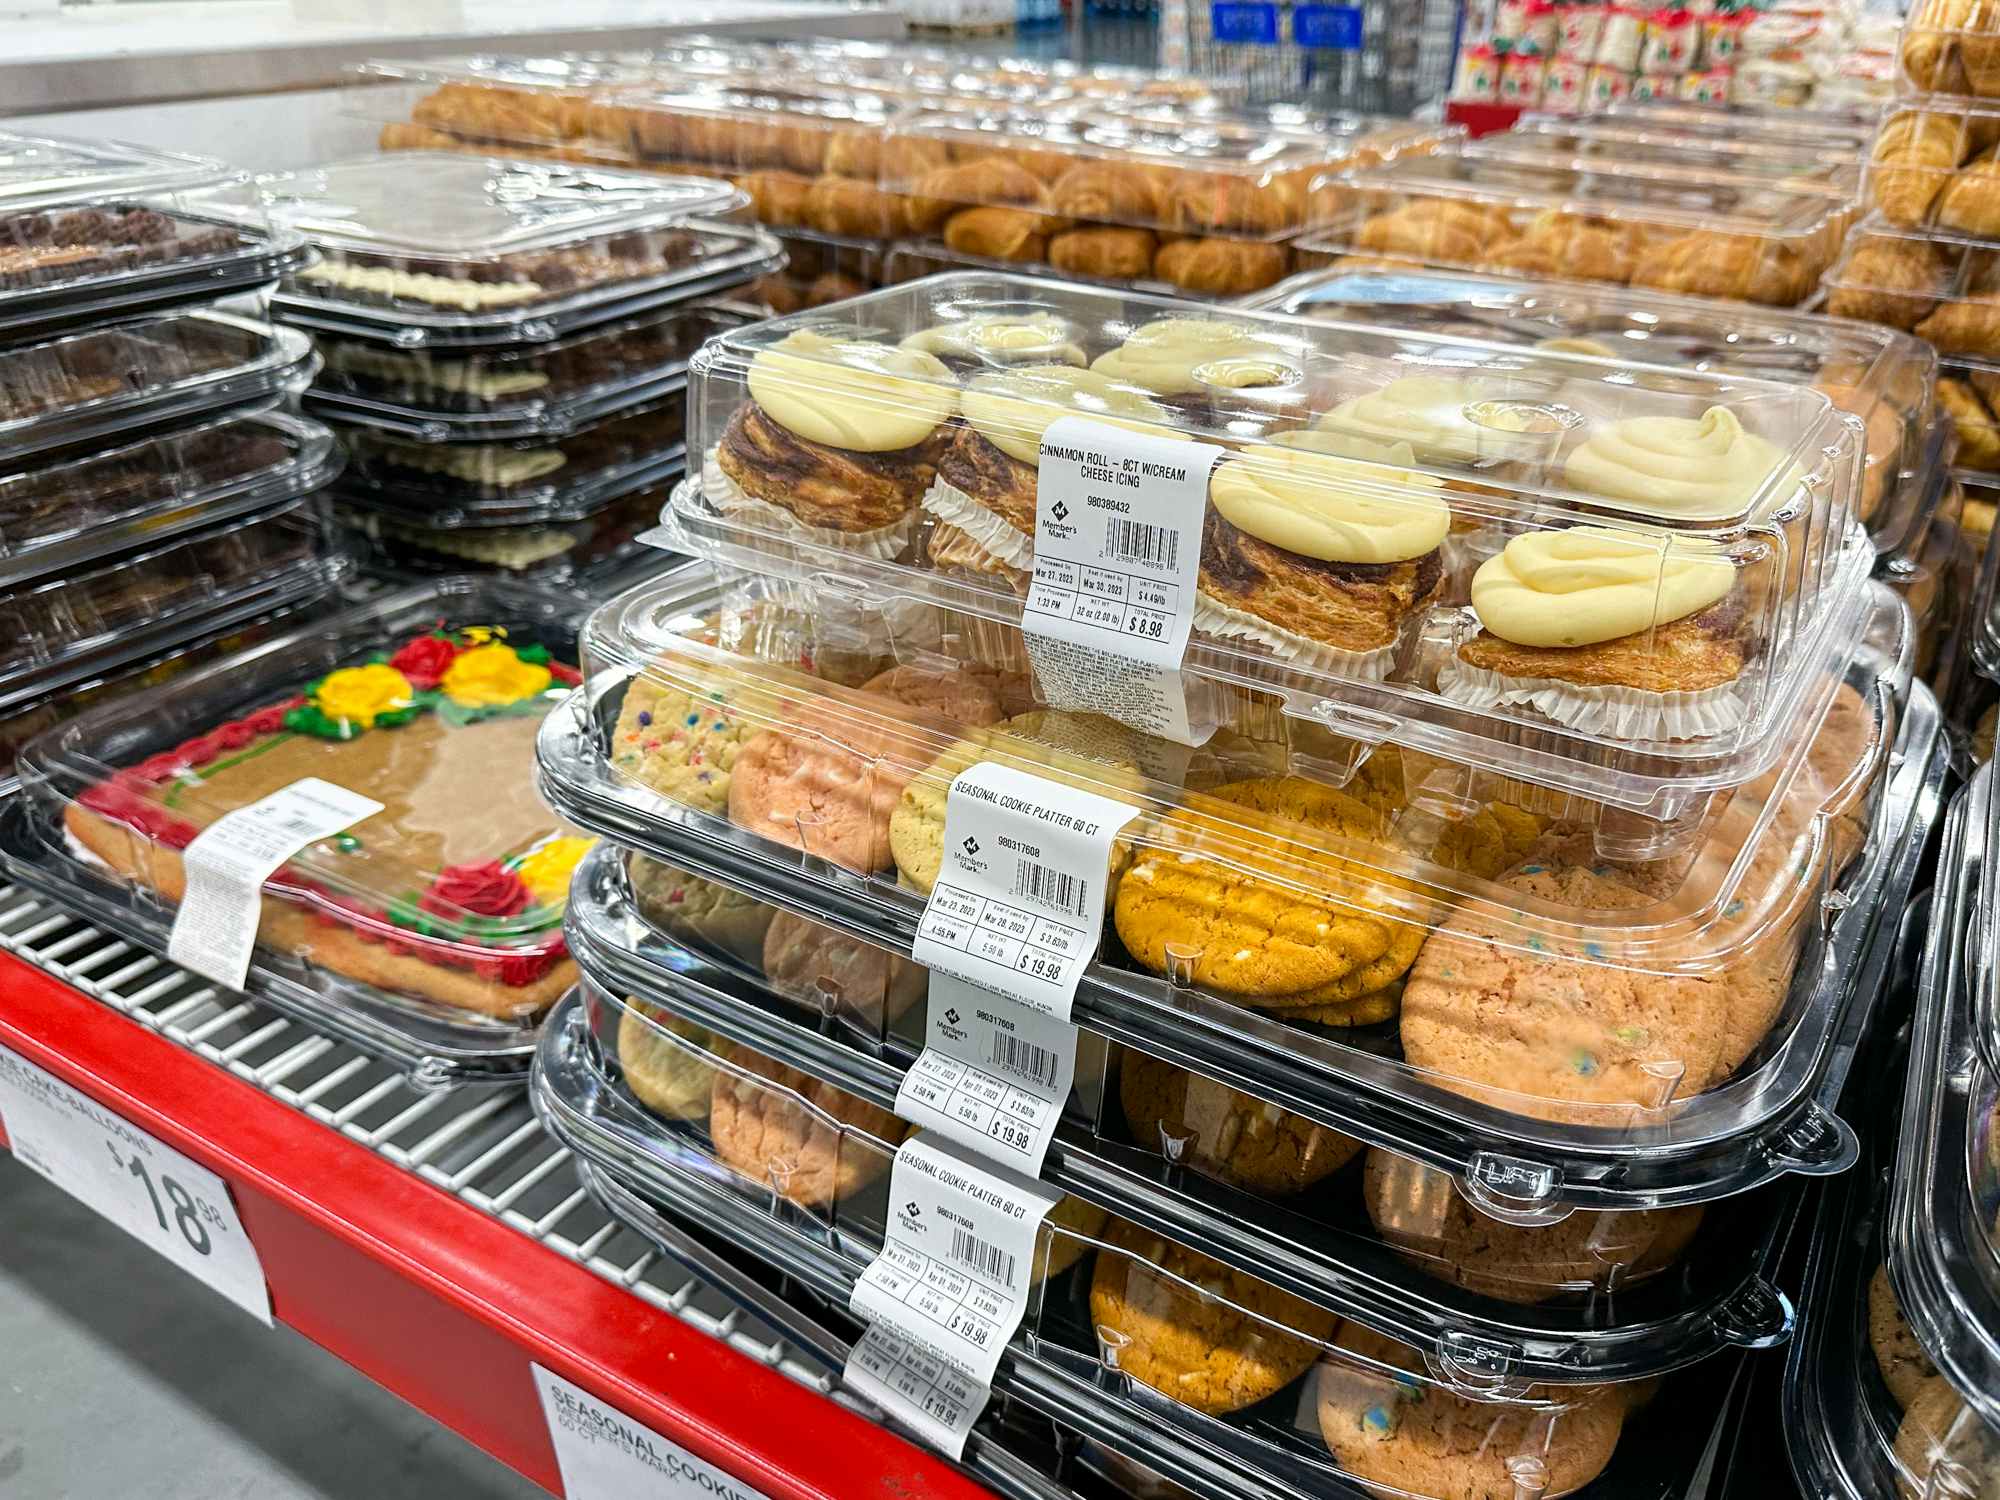 Baked goods in the bakery at Sam's Club